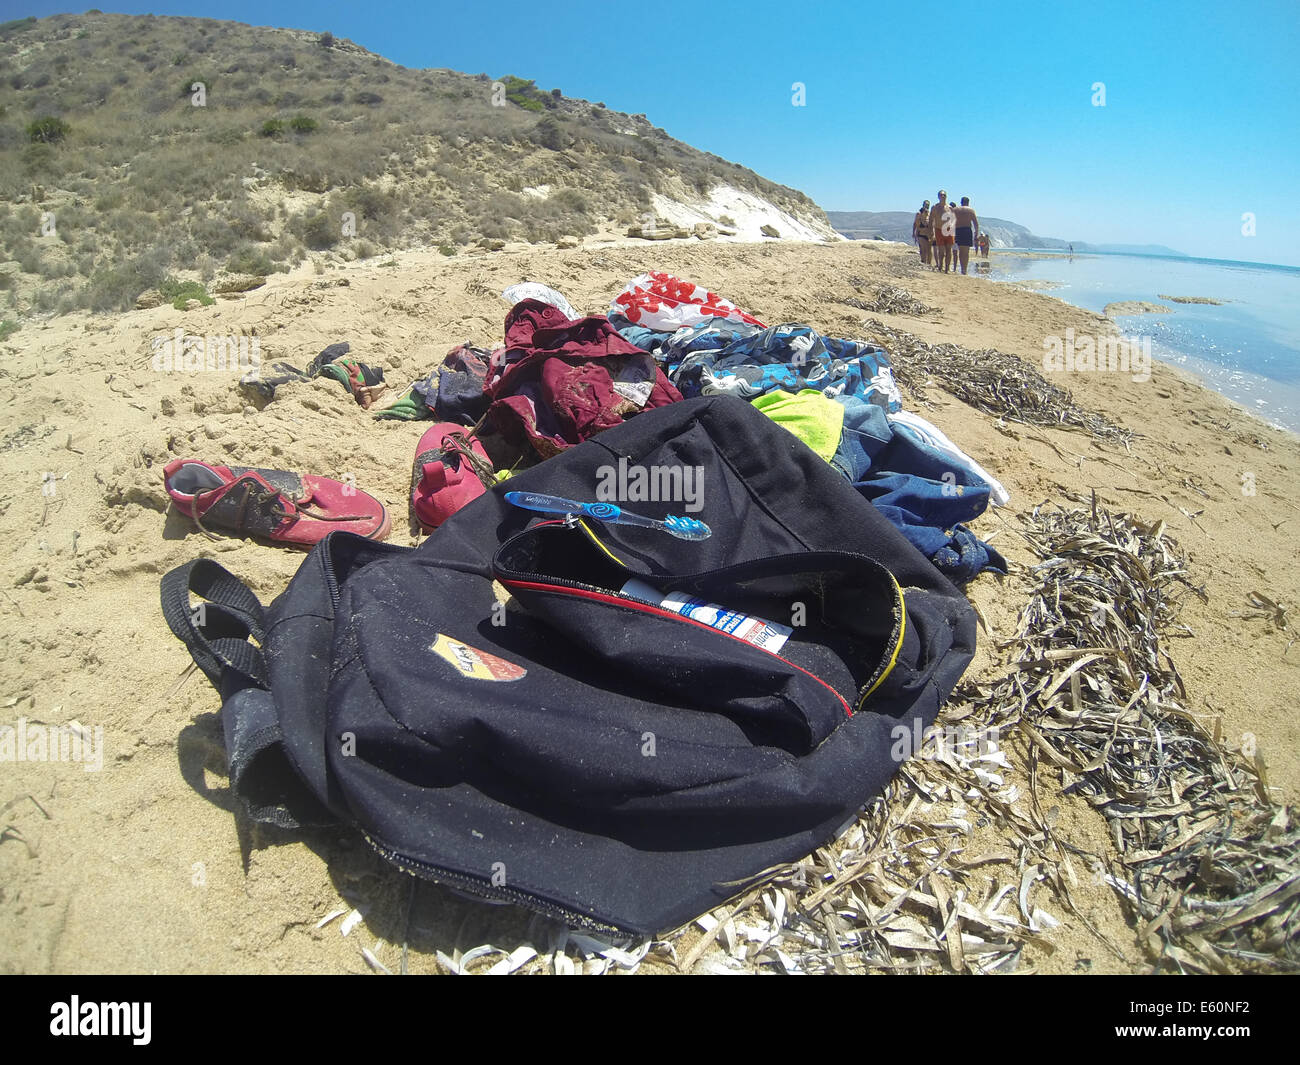 According rebuilt by the soldiers of the migrants would come on the shoreline with a boat later found on the beach of 'Funcitella' Stock Photo